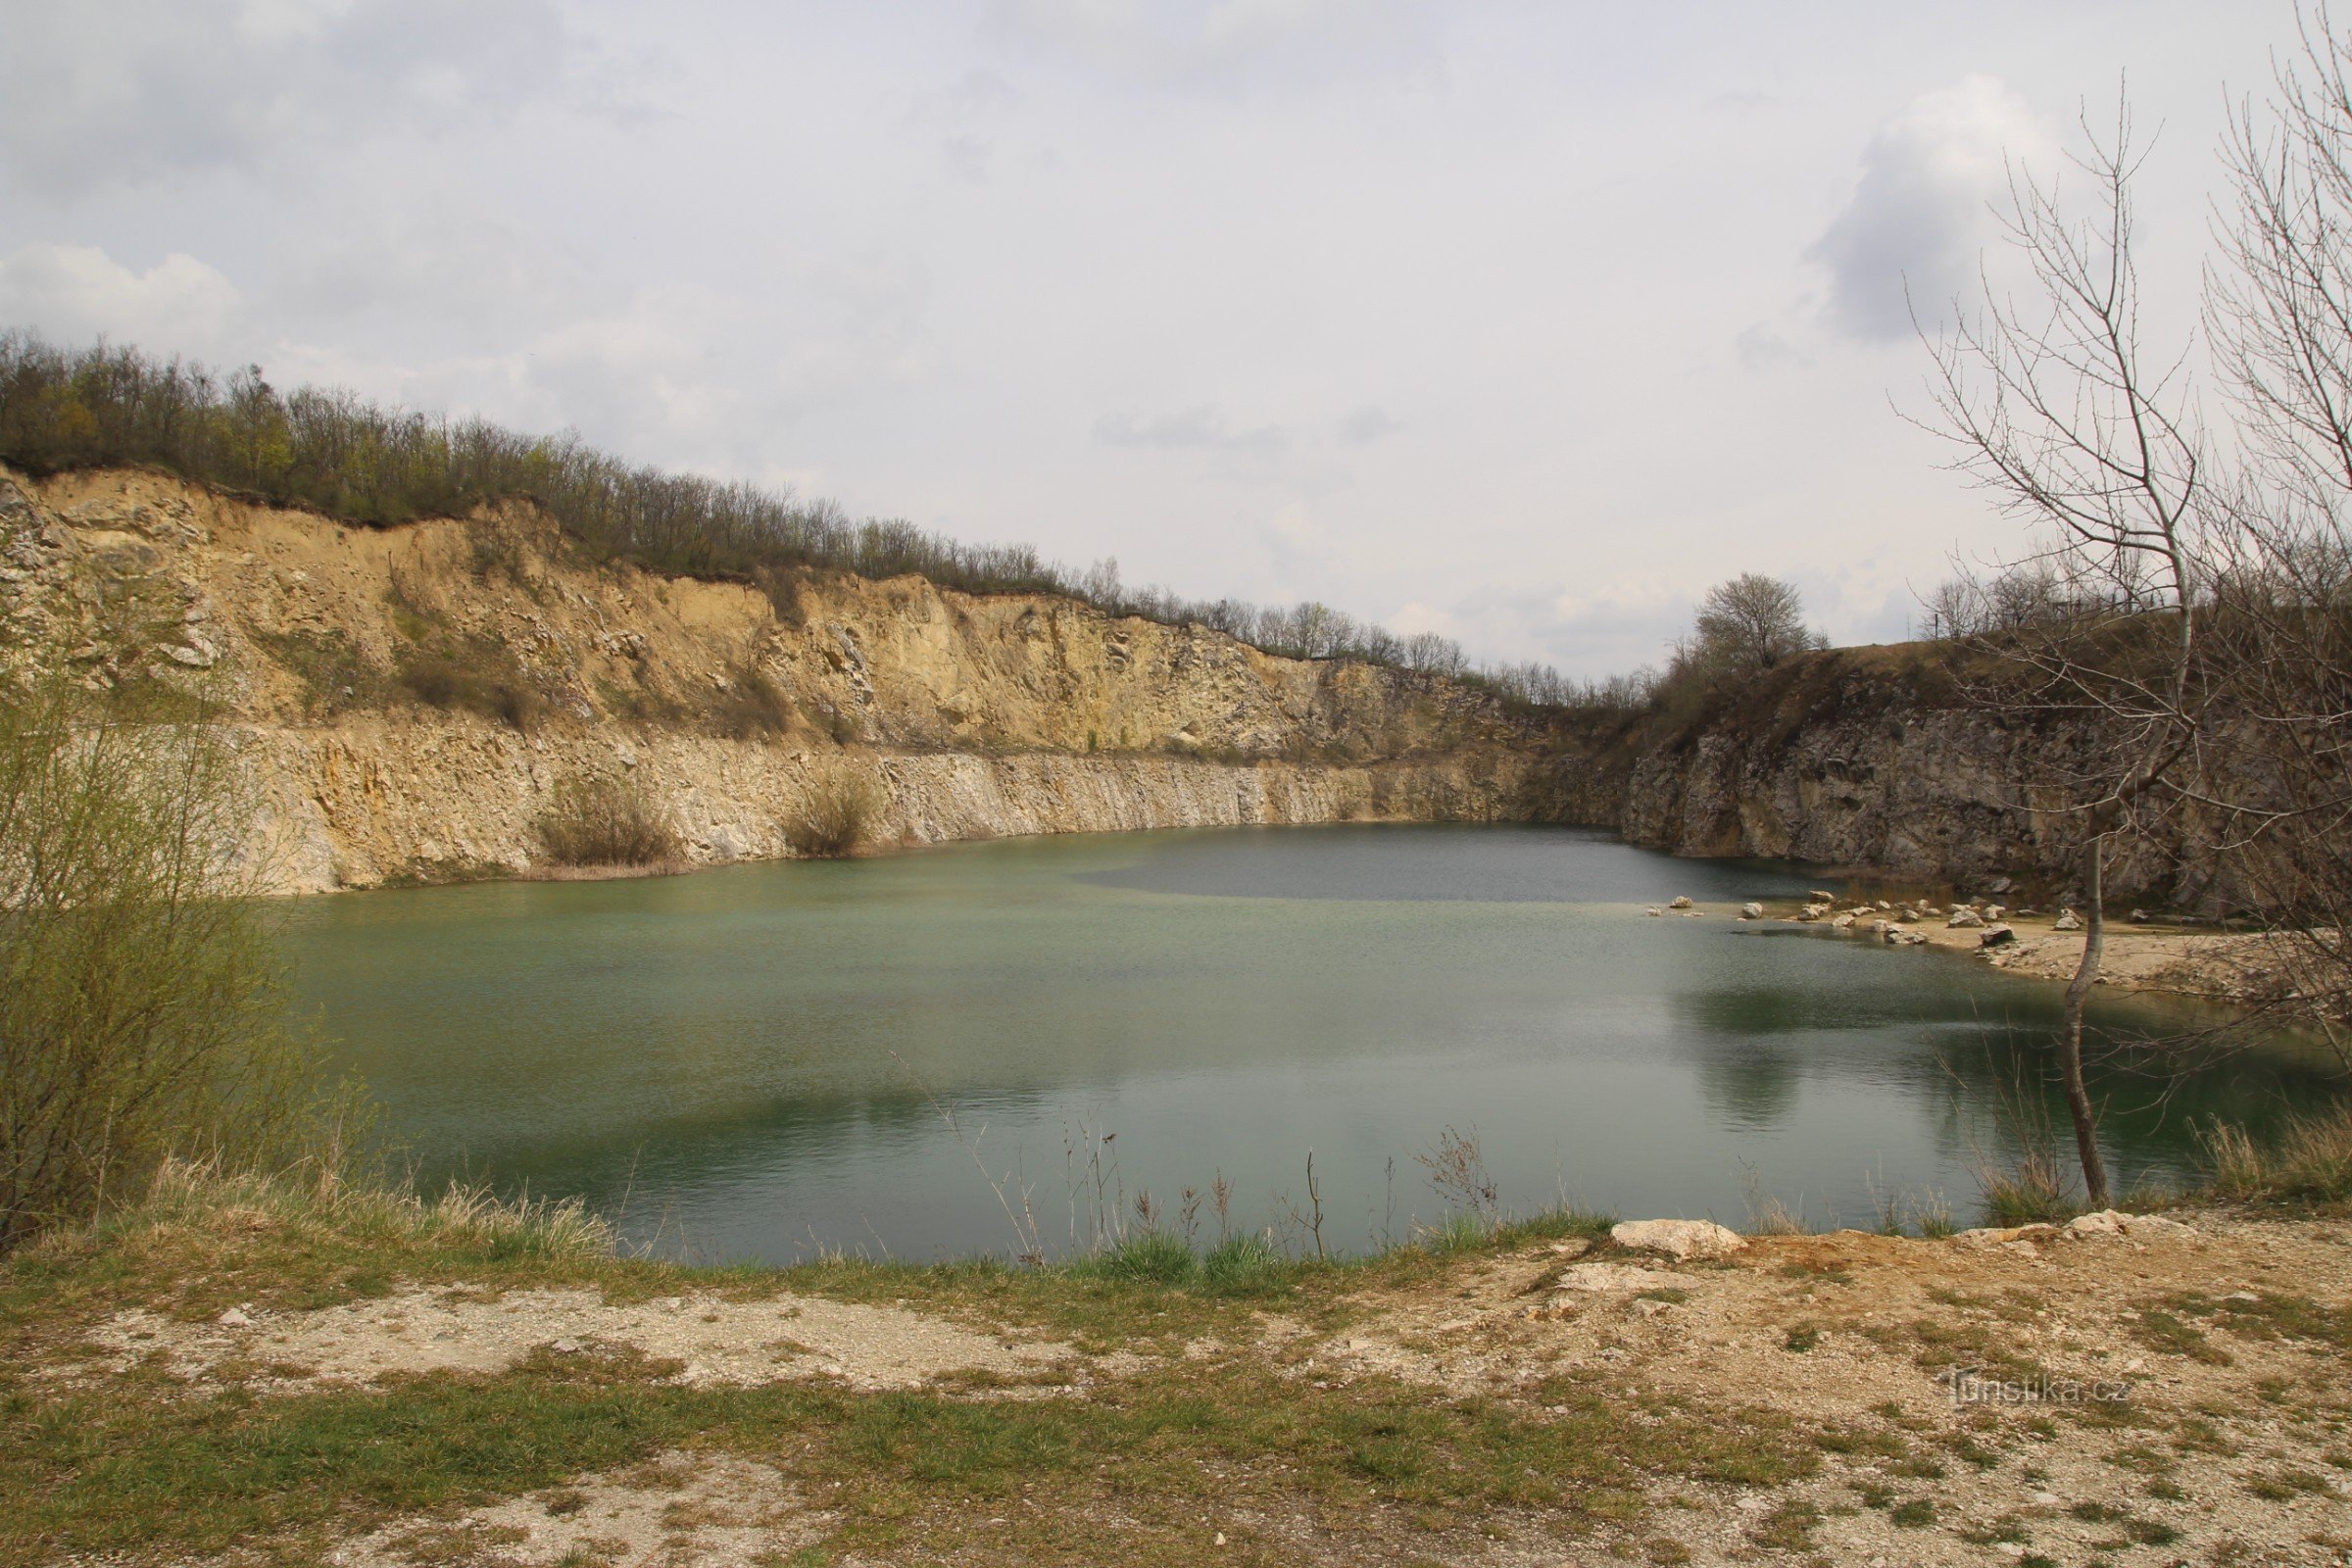 Detailed view of the quarry walls and water surface